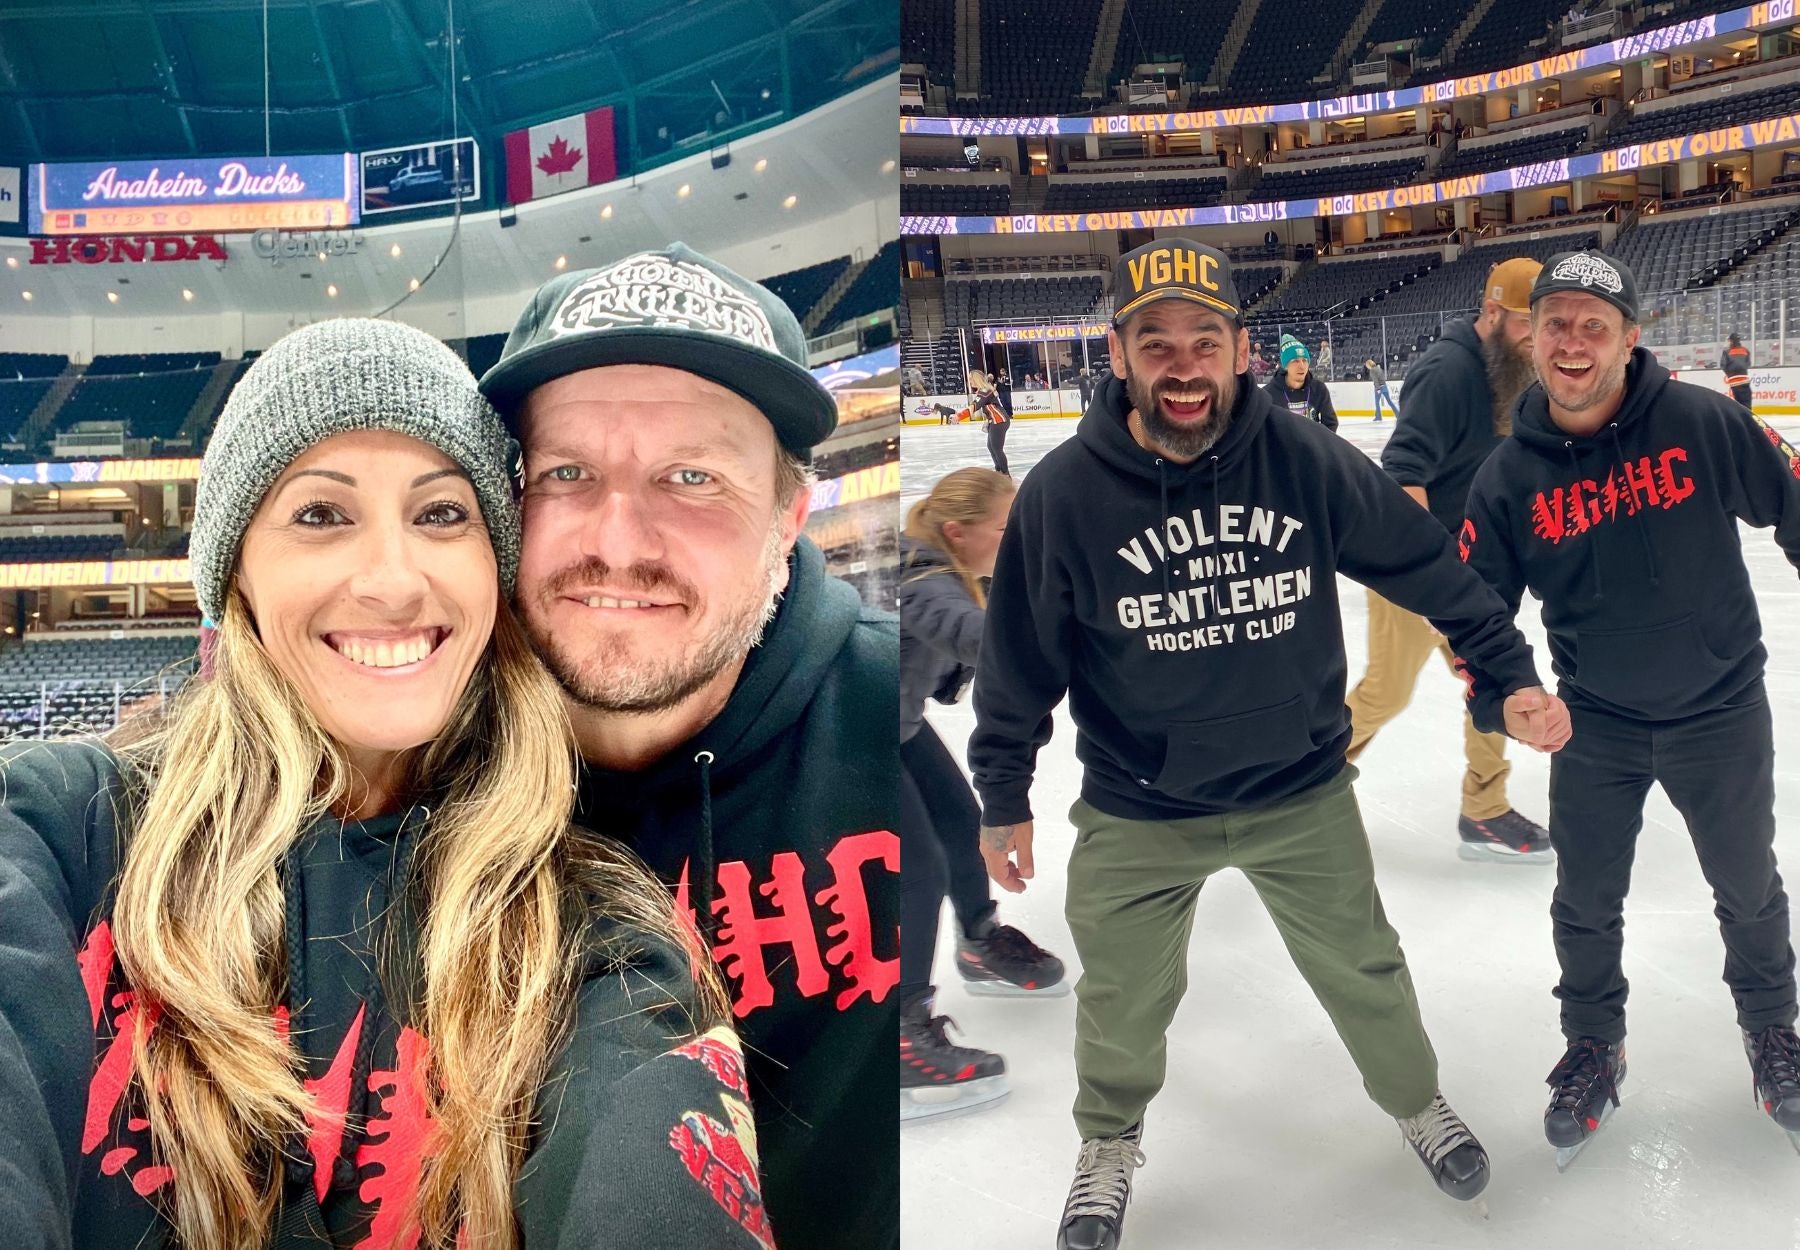 Violent Gentlemen Hockey Clothing Company visits Honda Center, the home of the Anaheim Ducks for a hockey game against the Vegas Golden Knights. Here are some of our favorite memories skating on the ice after the game.